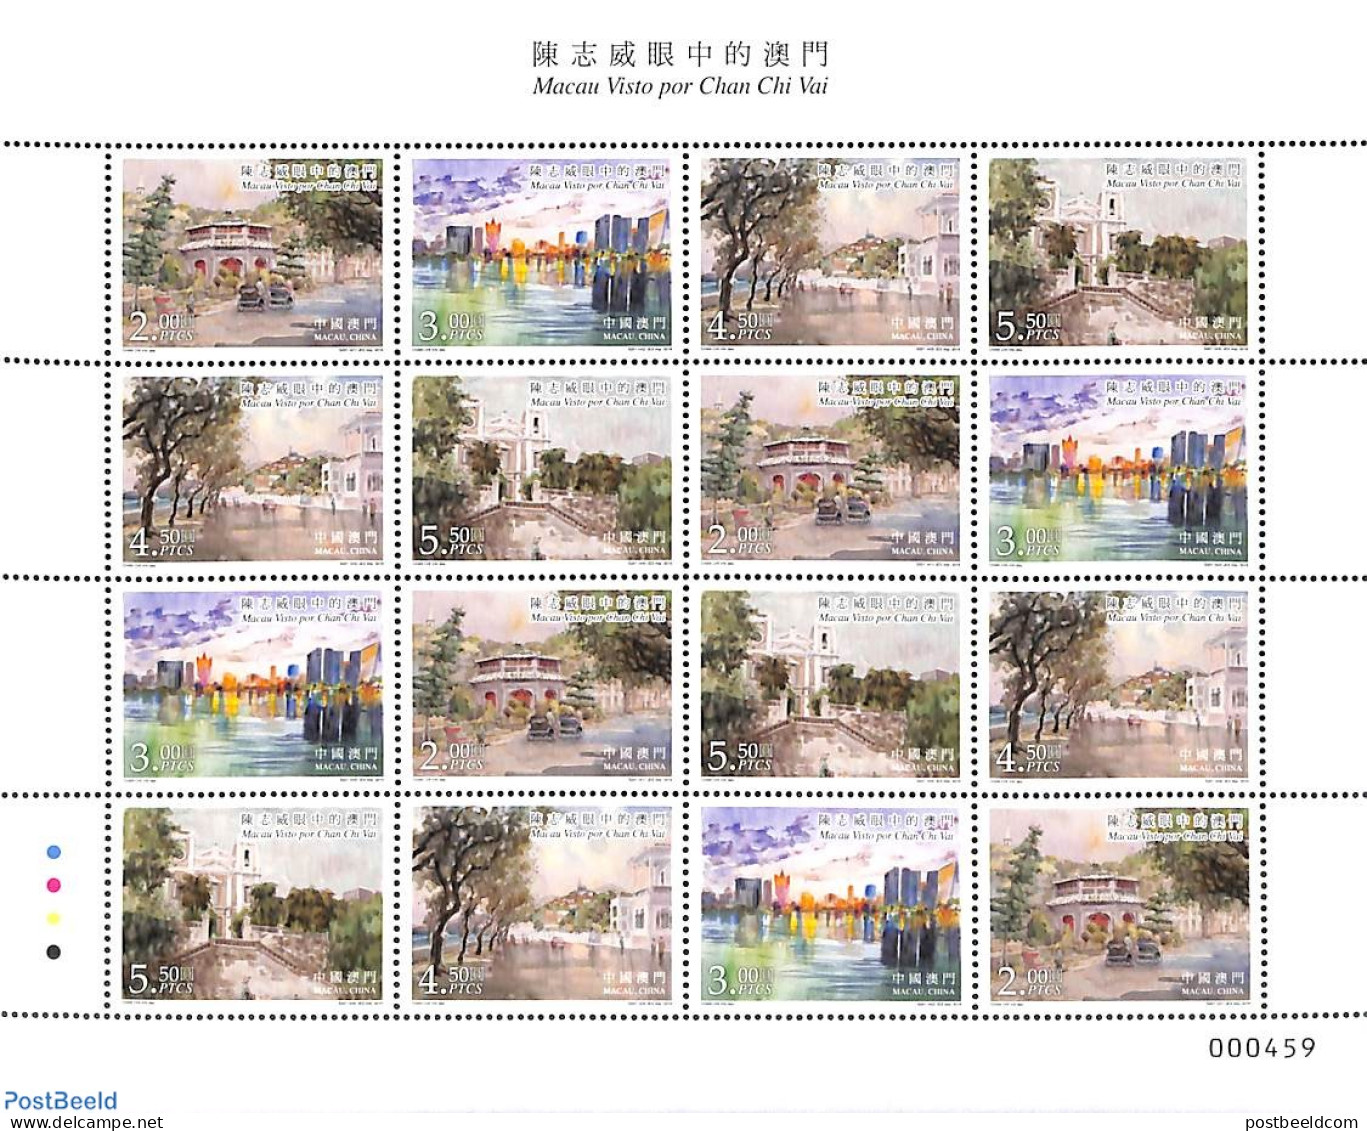 Macao 2016 Macau Seen By Chan Chi Vai M/s, Mint NH, Art - Paintings - Unused Stamps